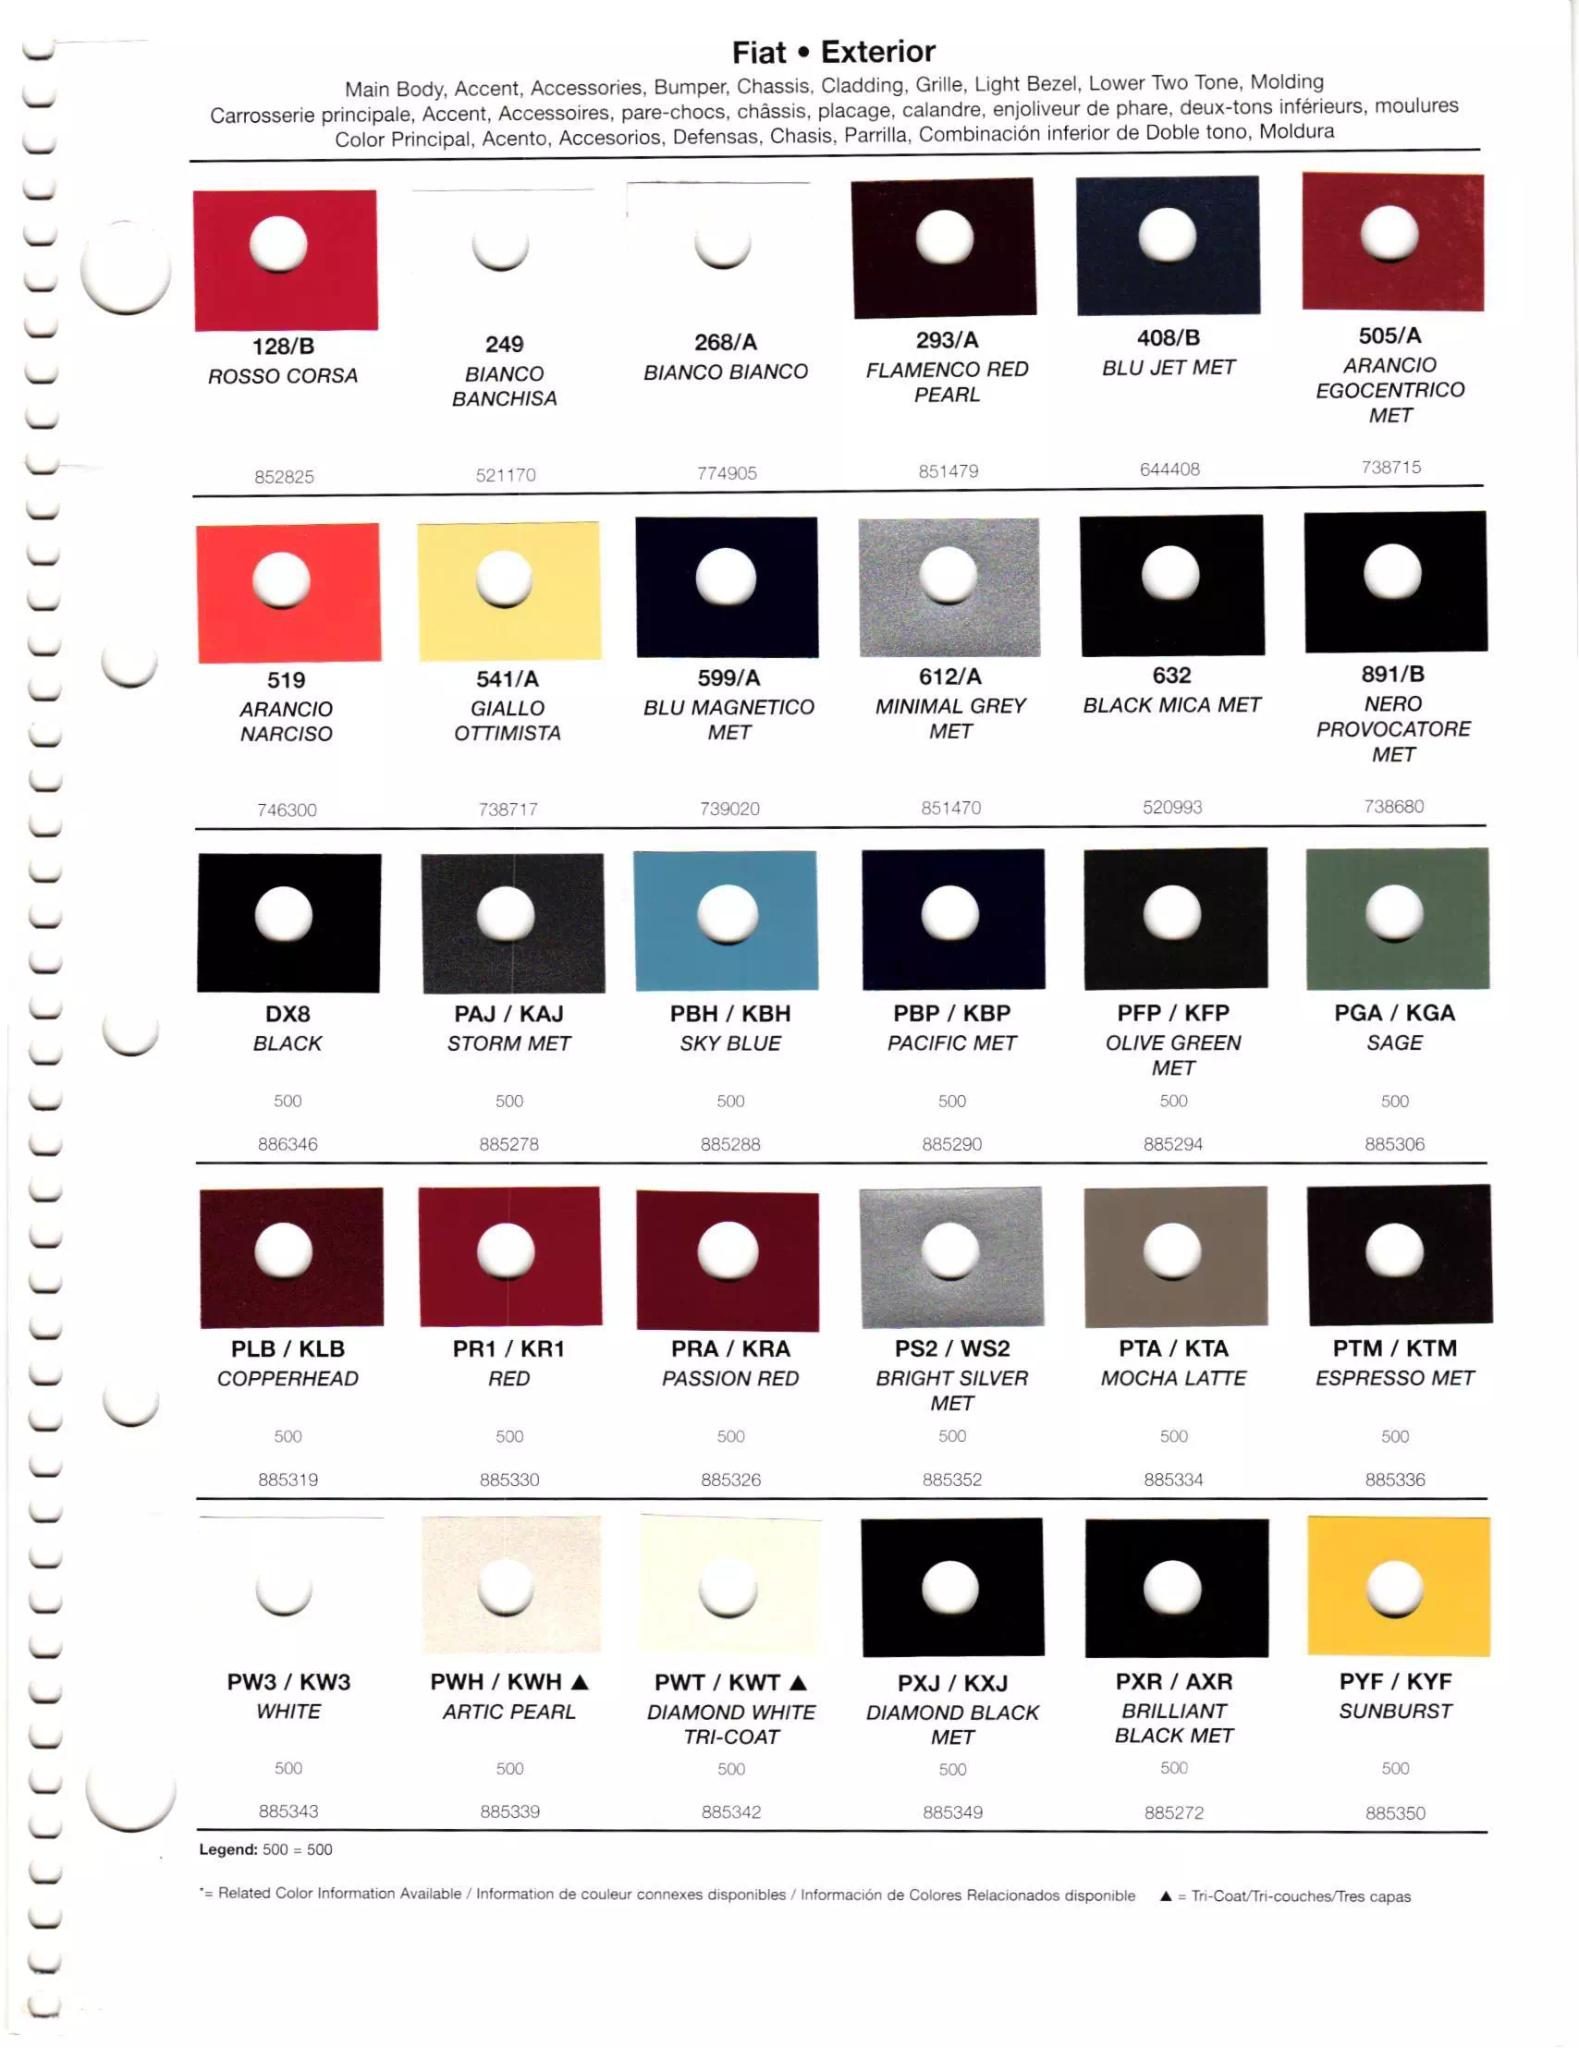 oem paint codes, color charts, and color names along with mixing stock numbers for 2012 fiat colors.